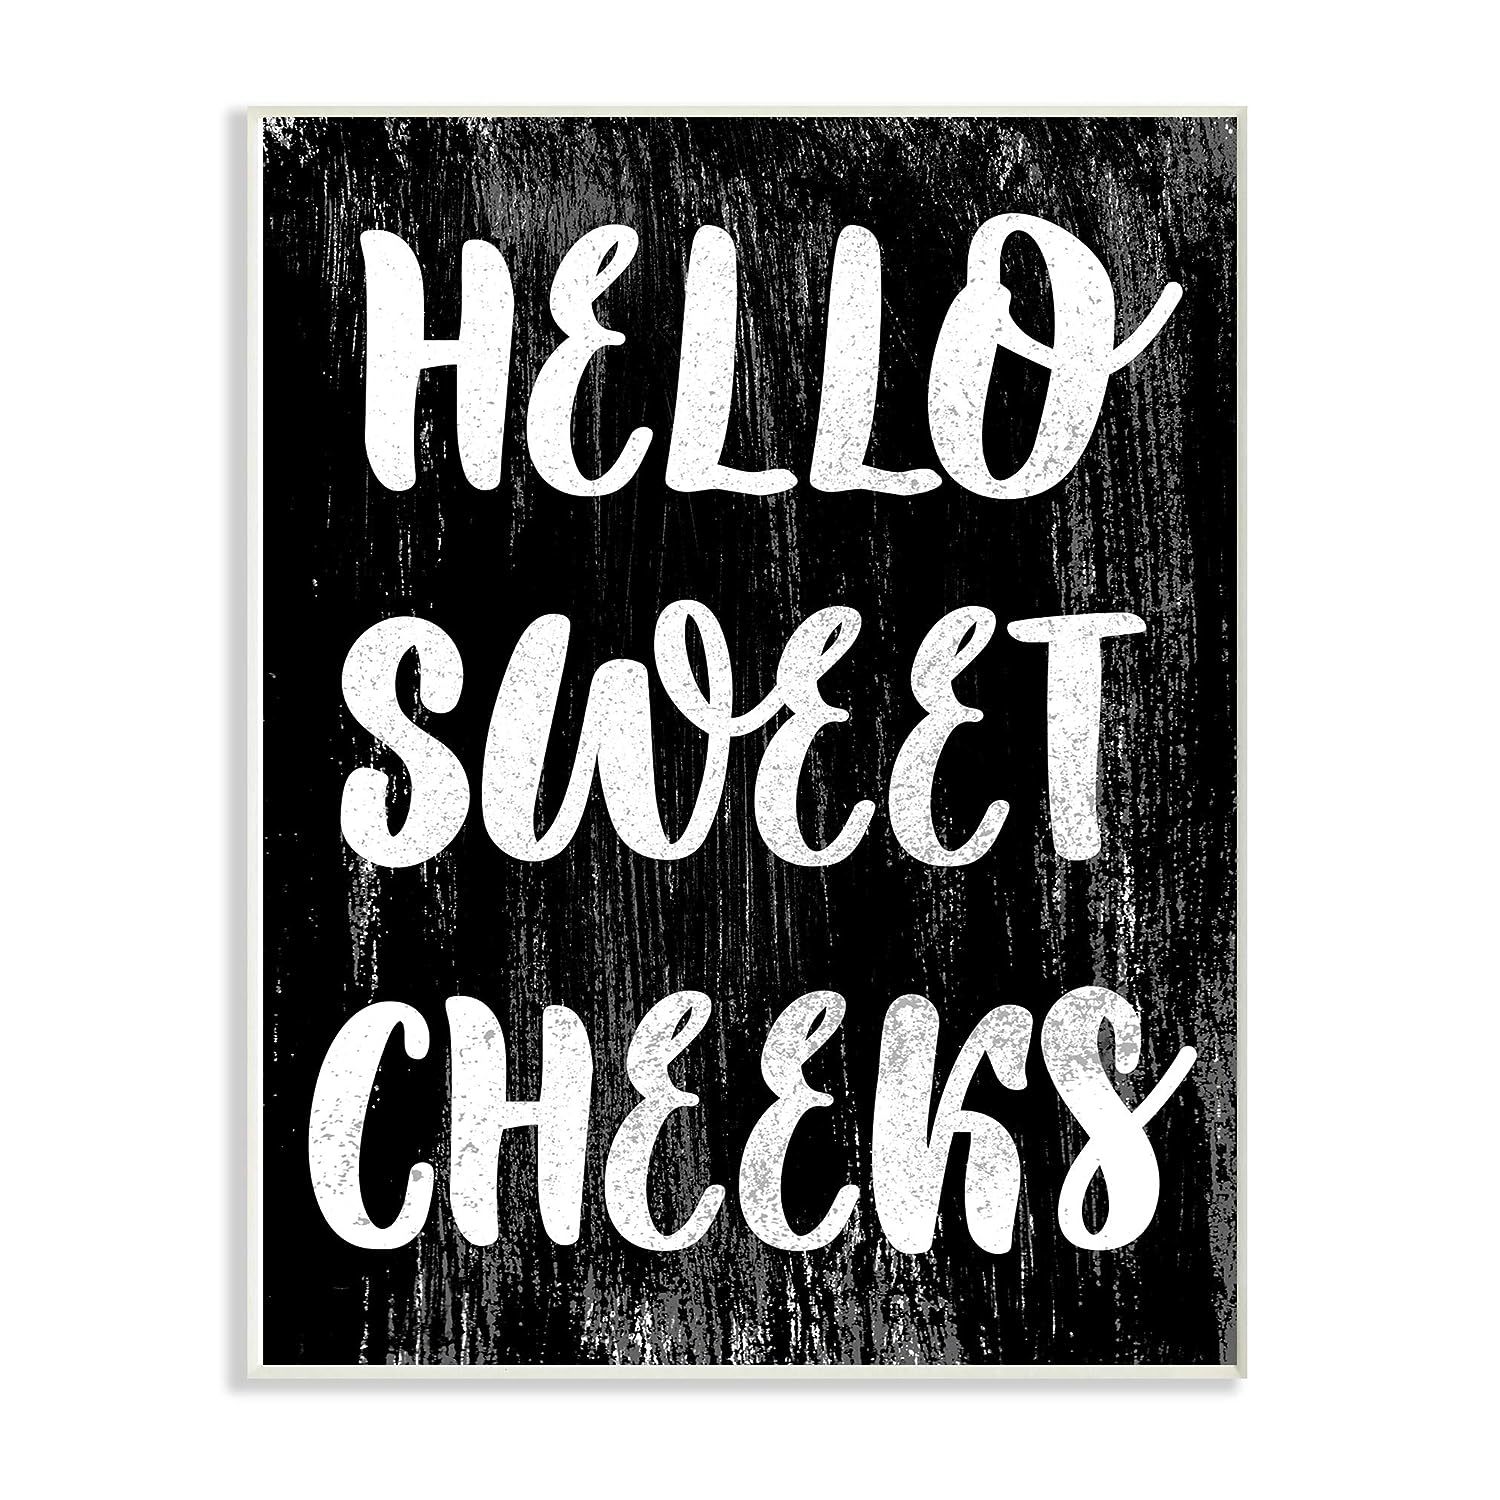 Stupell Industries Black and White Distressed Textured Hello Sweet Cheeks Wall P - $51.99